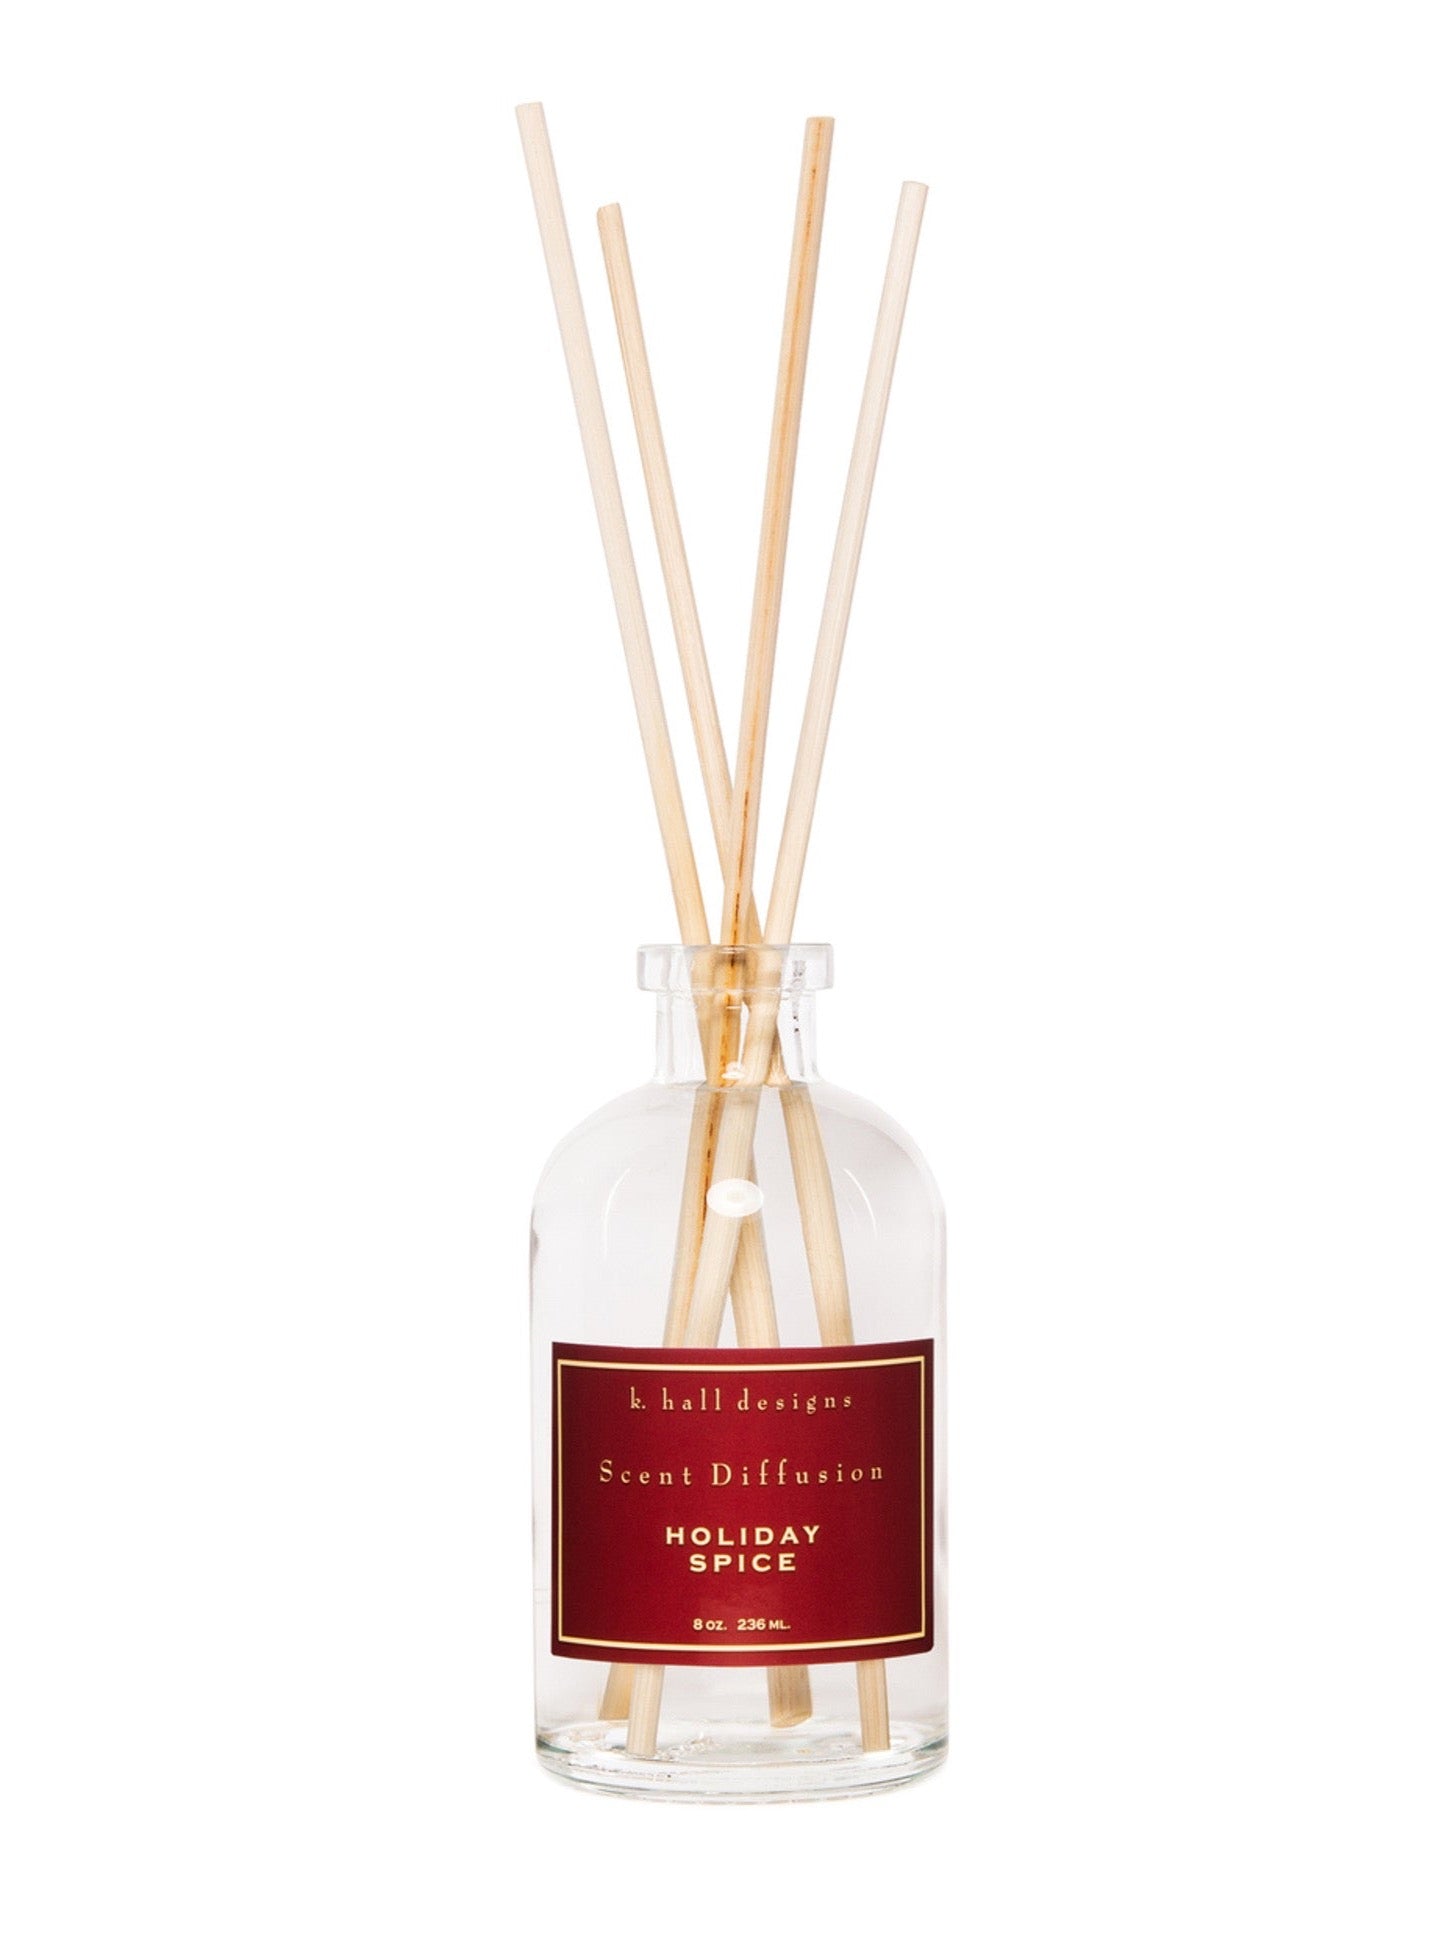 Boxed Diffuser Kit - Holiday Spice 8oz